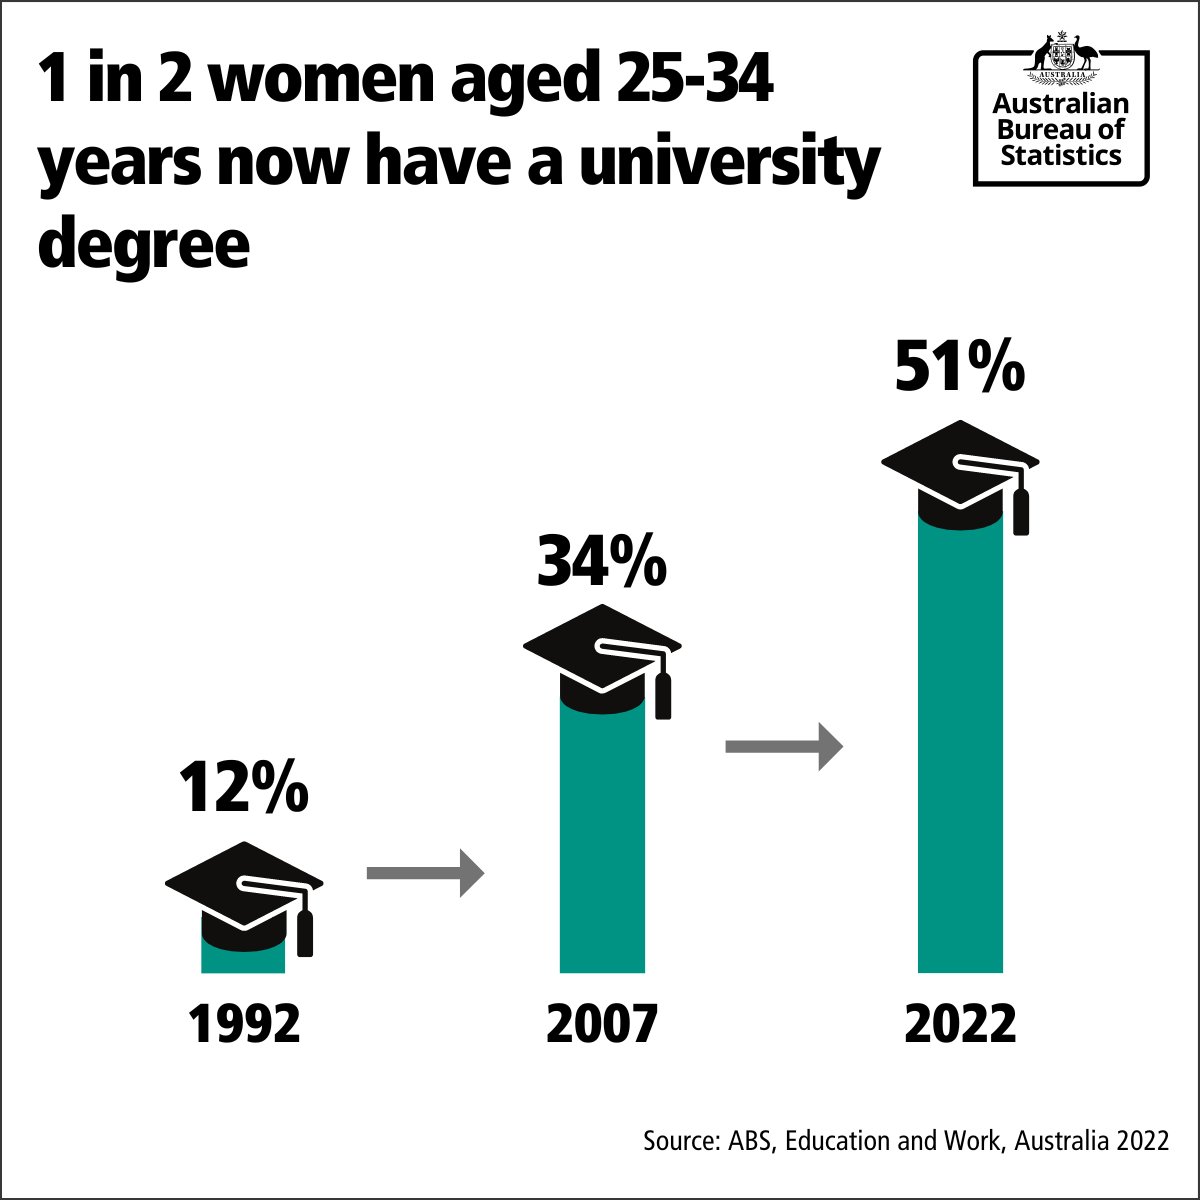 This International Women's Day we are celebrating the progress Australian women have made - over half of all women 25-34 now have a university degree, up from 12% in 1992! 
#CrackingTheCode #IWD2023